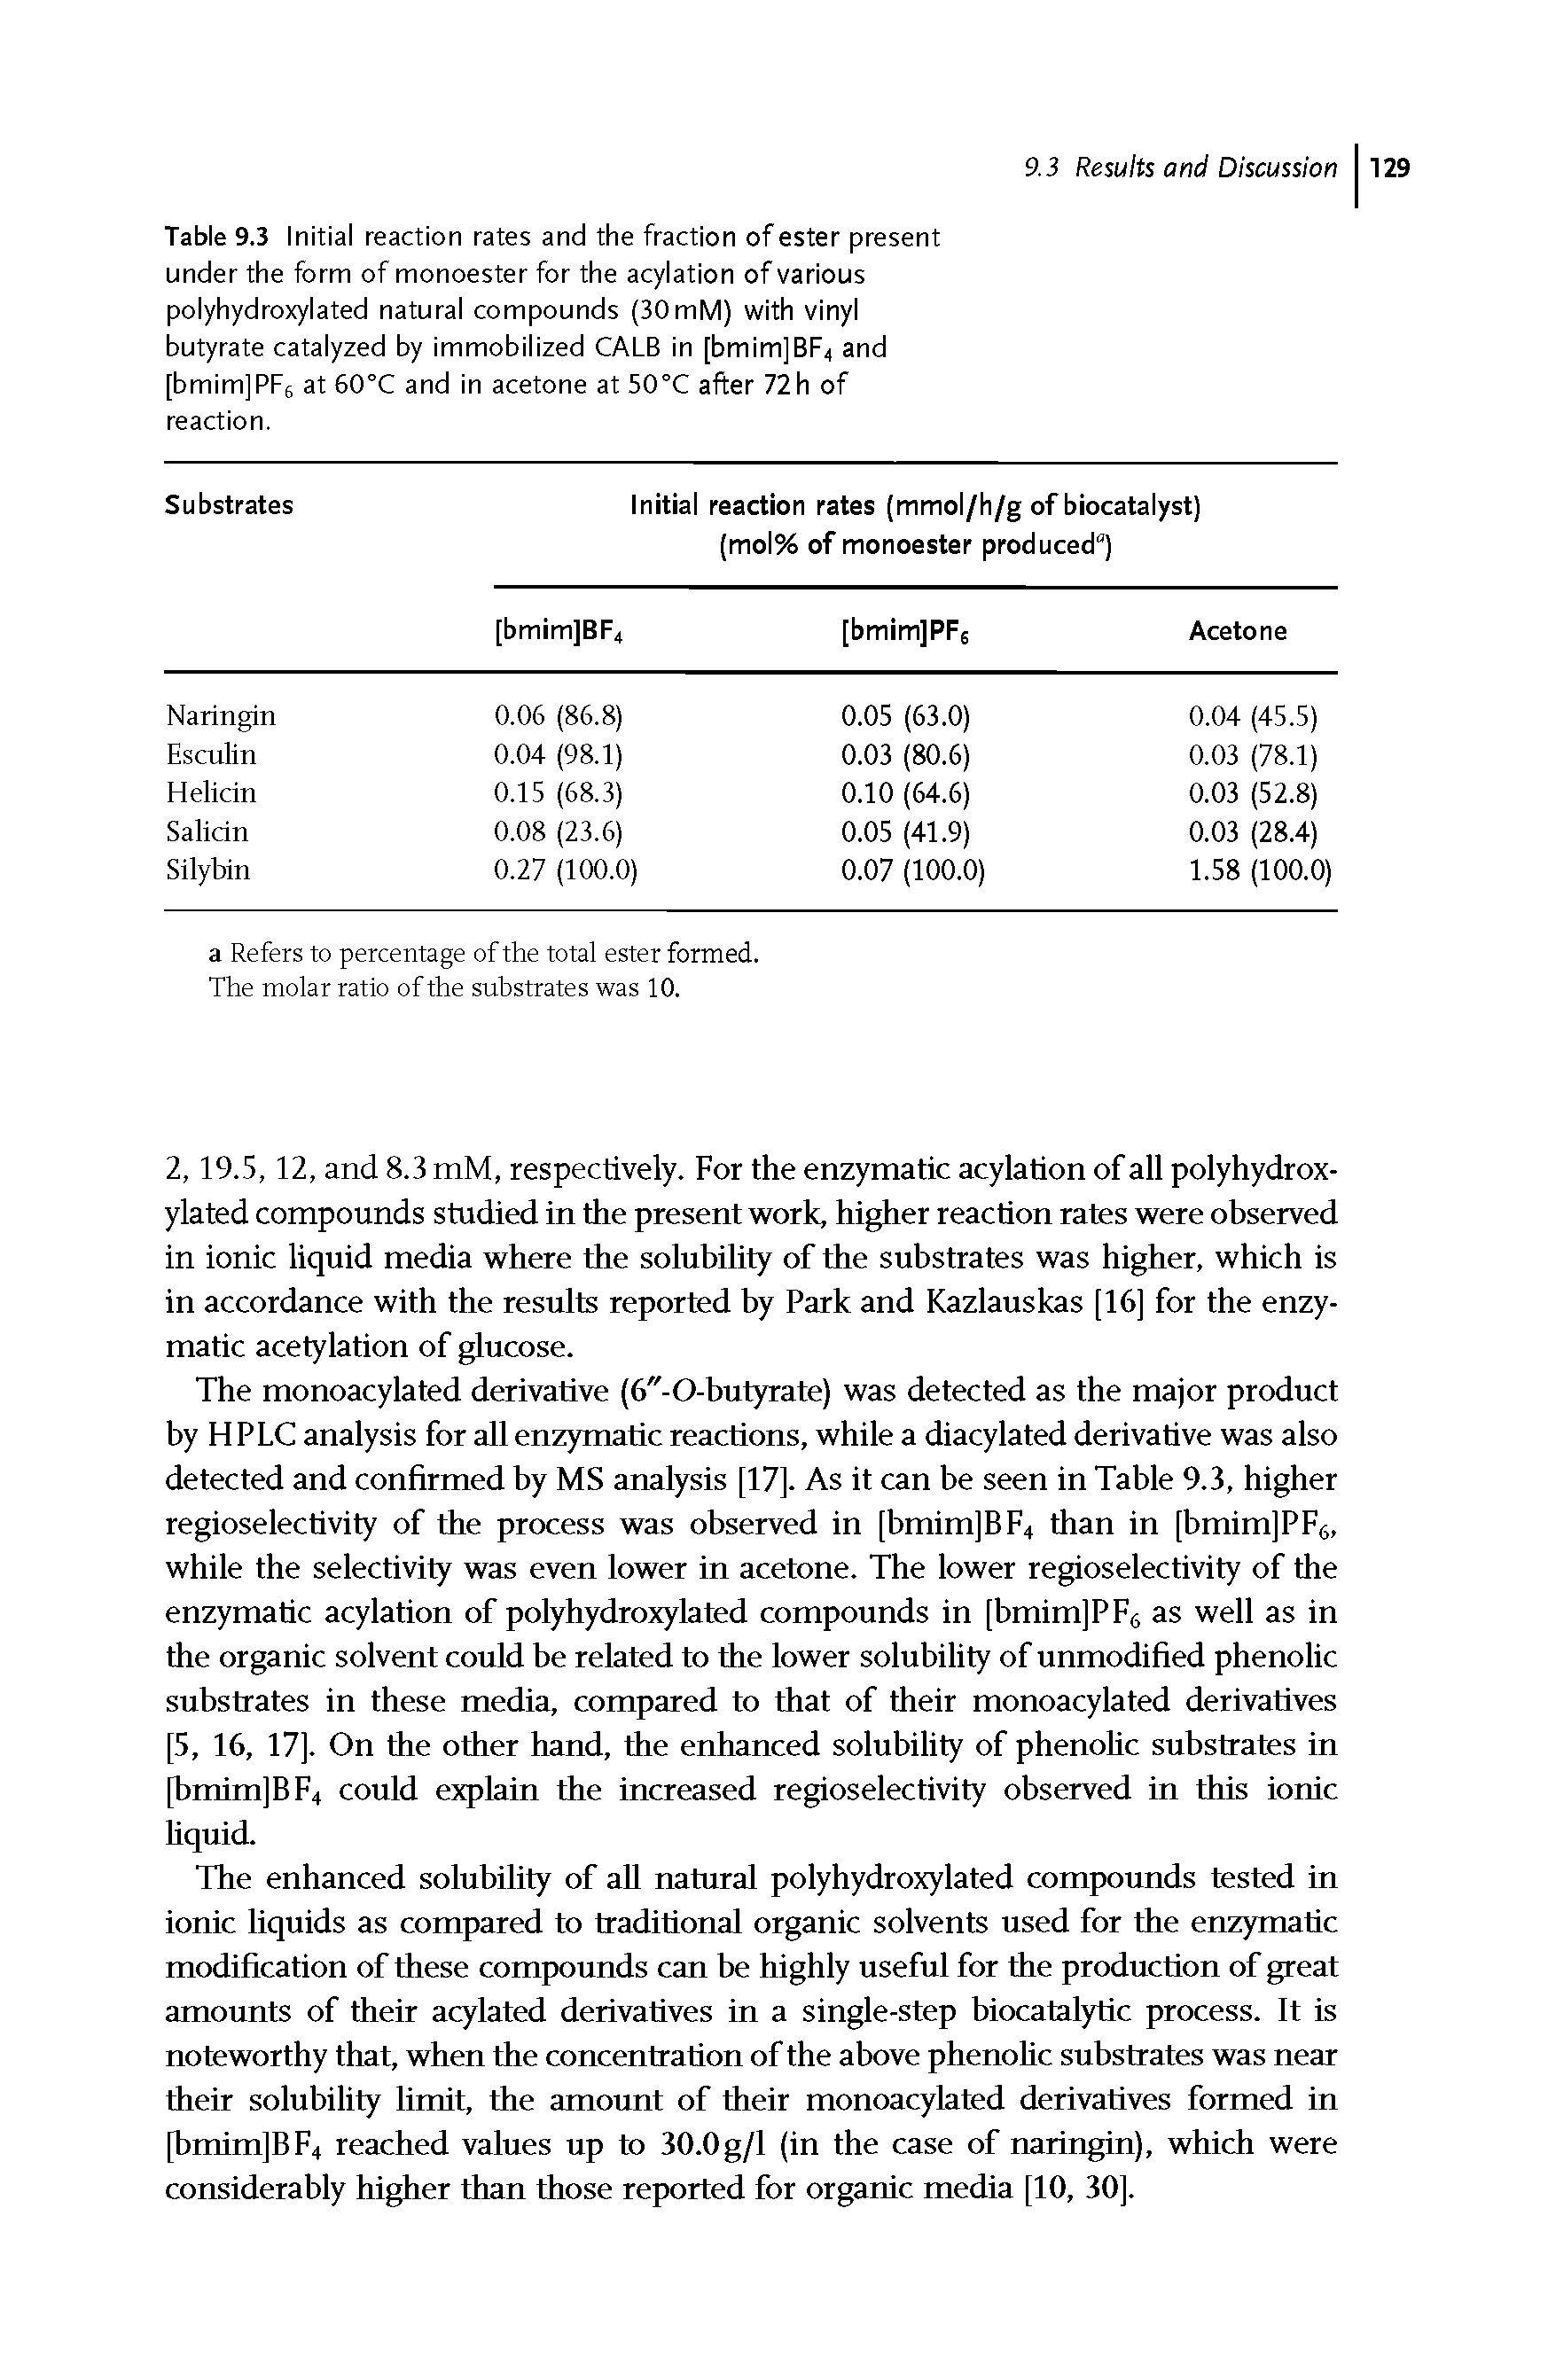 Table 9.3 Initial reaction rates and the fraction of ester present under the form of monoester for the acylation of various polyhydroxylated natural compounds (30mM) with vinyl butyrate catalyzed by immobilized CALB in [bmim]BF4 and [bmimJPFs at 60°C and in acetone at 50°C after 72h of reaction.